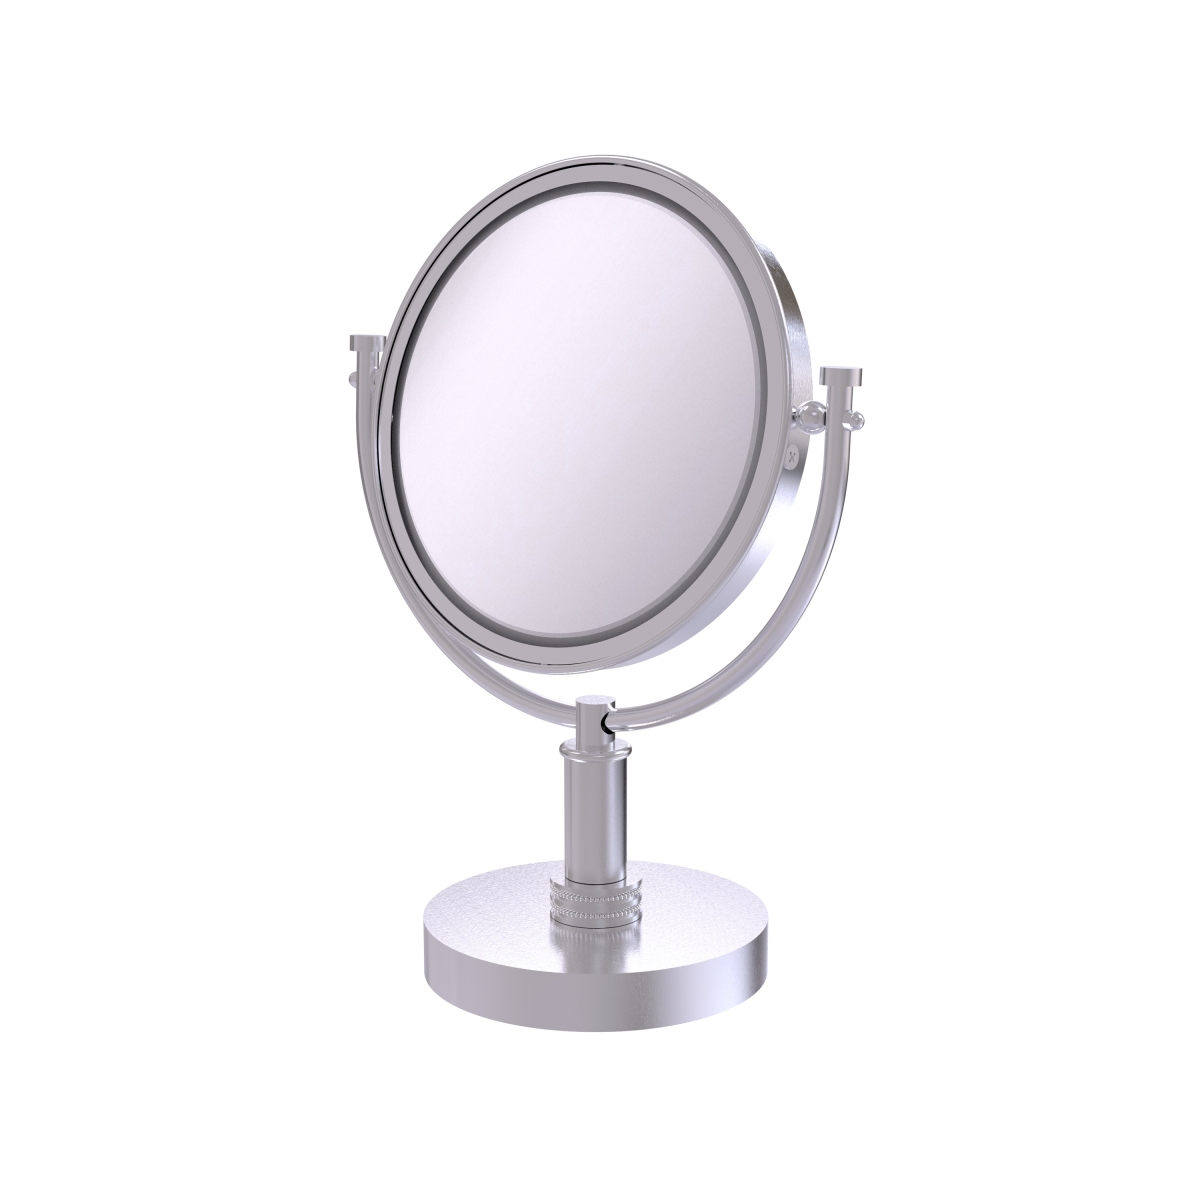 Picture of Allied Brass DM-4D-4X-SCH 8 in. Vanity Top Make-Up Mirror 4X Magnification, Satin Chrome - 15 x 8 x 8 in.